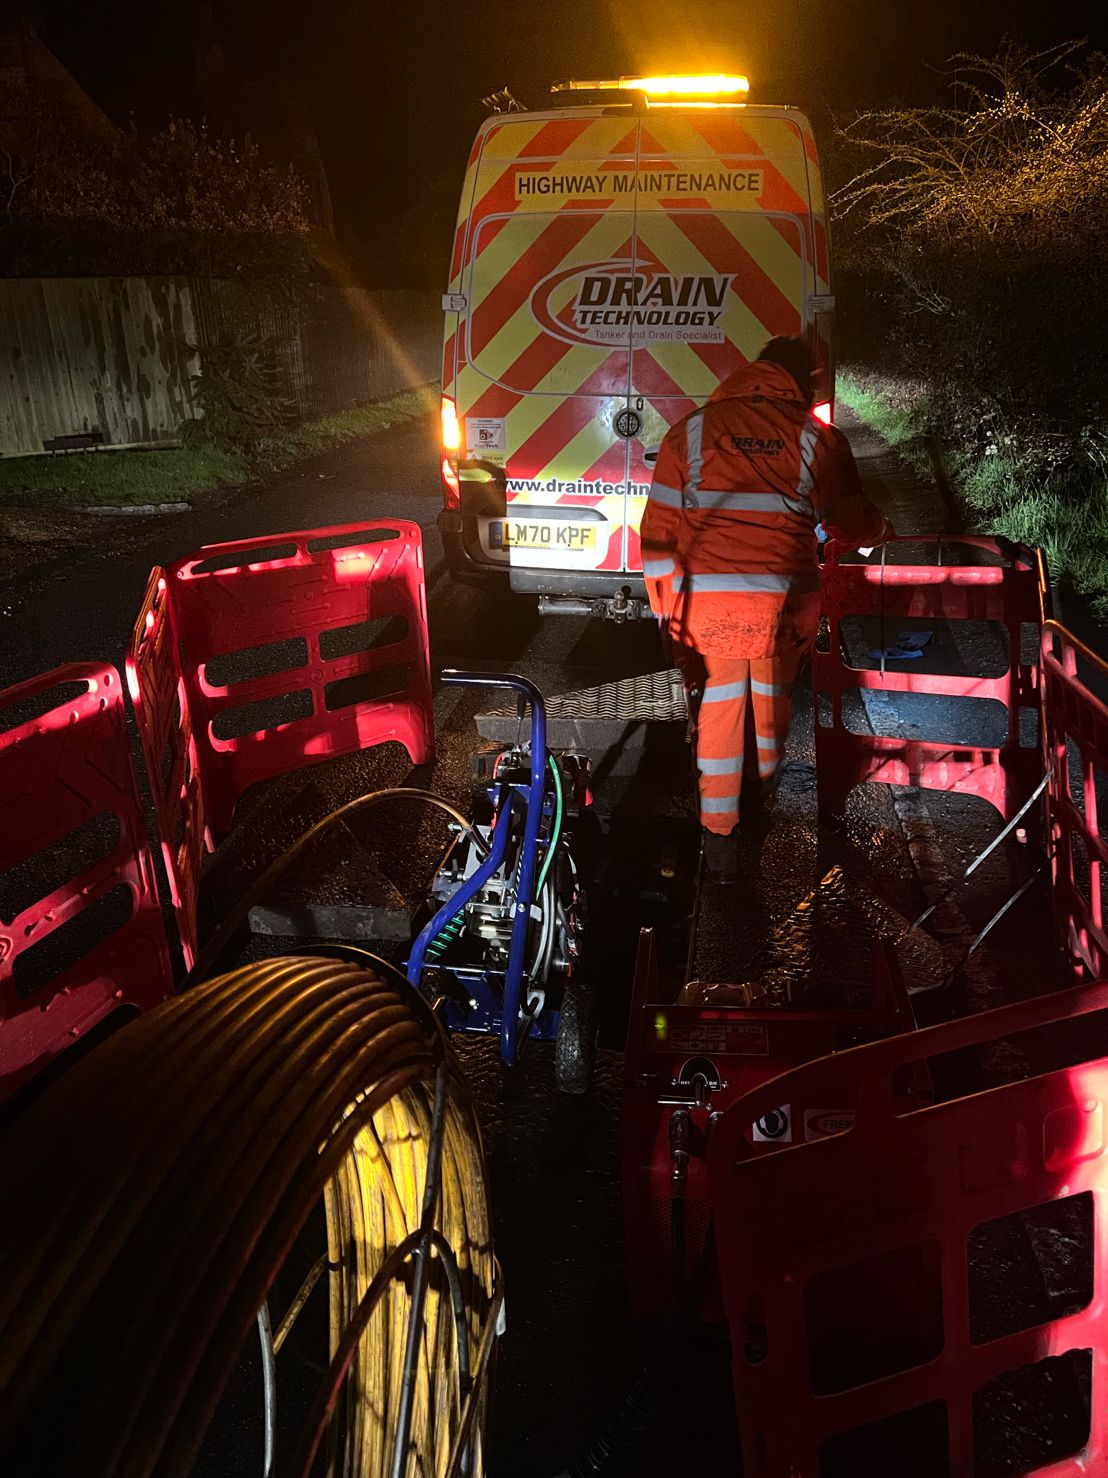 In the middle of the night, a Drain technology employee is pictured using Telecom equipment. The employee is situated behind a Highway Maintenance Drain technology van on the roadside, wearing hi-vis.